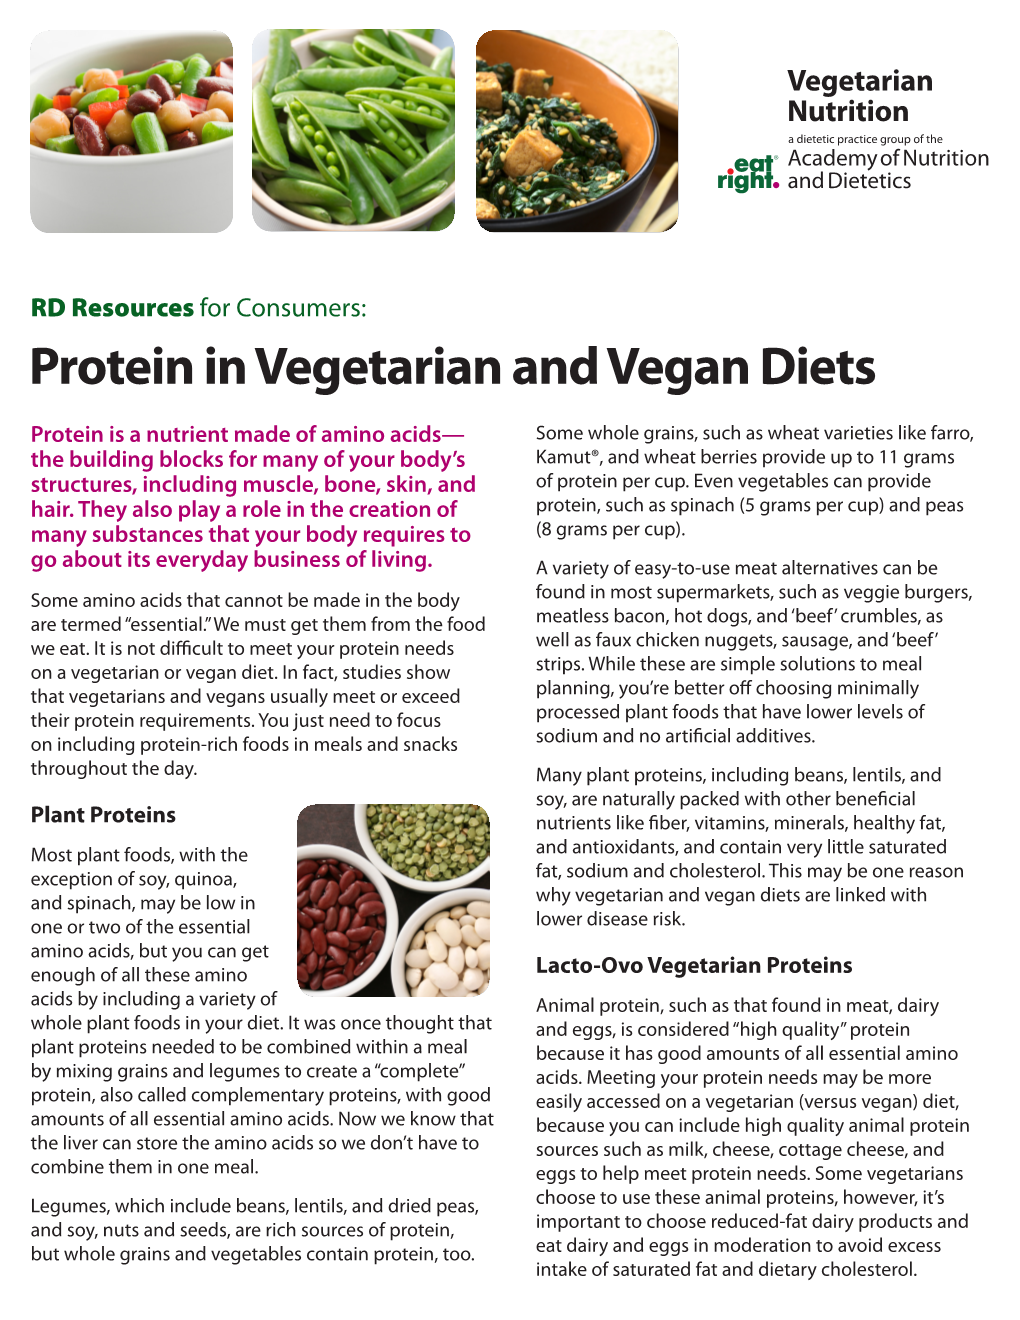 RD Resources for Consumers: Protein in Vegetarian and Vegan Diets